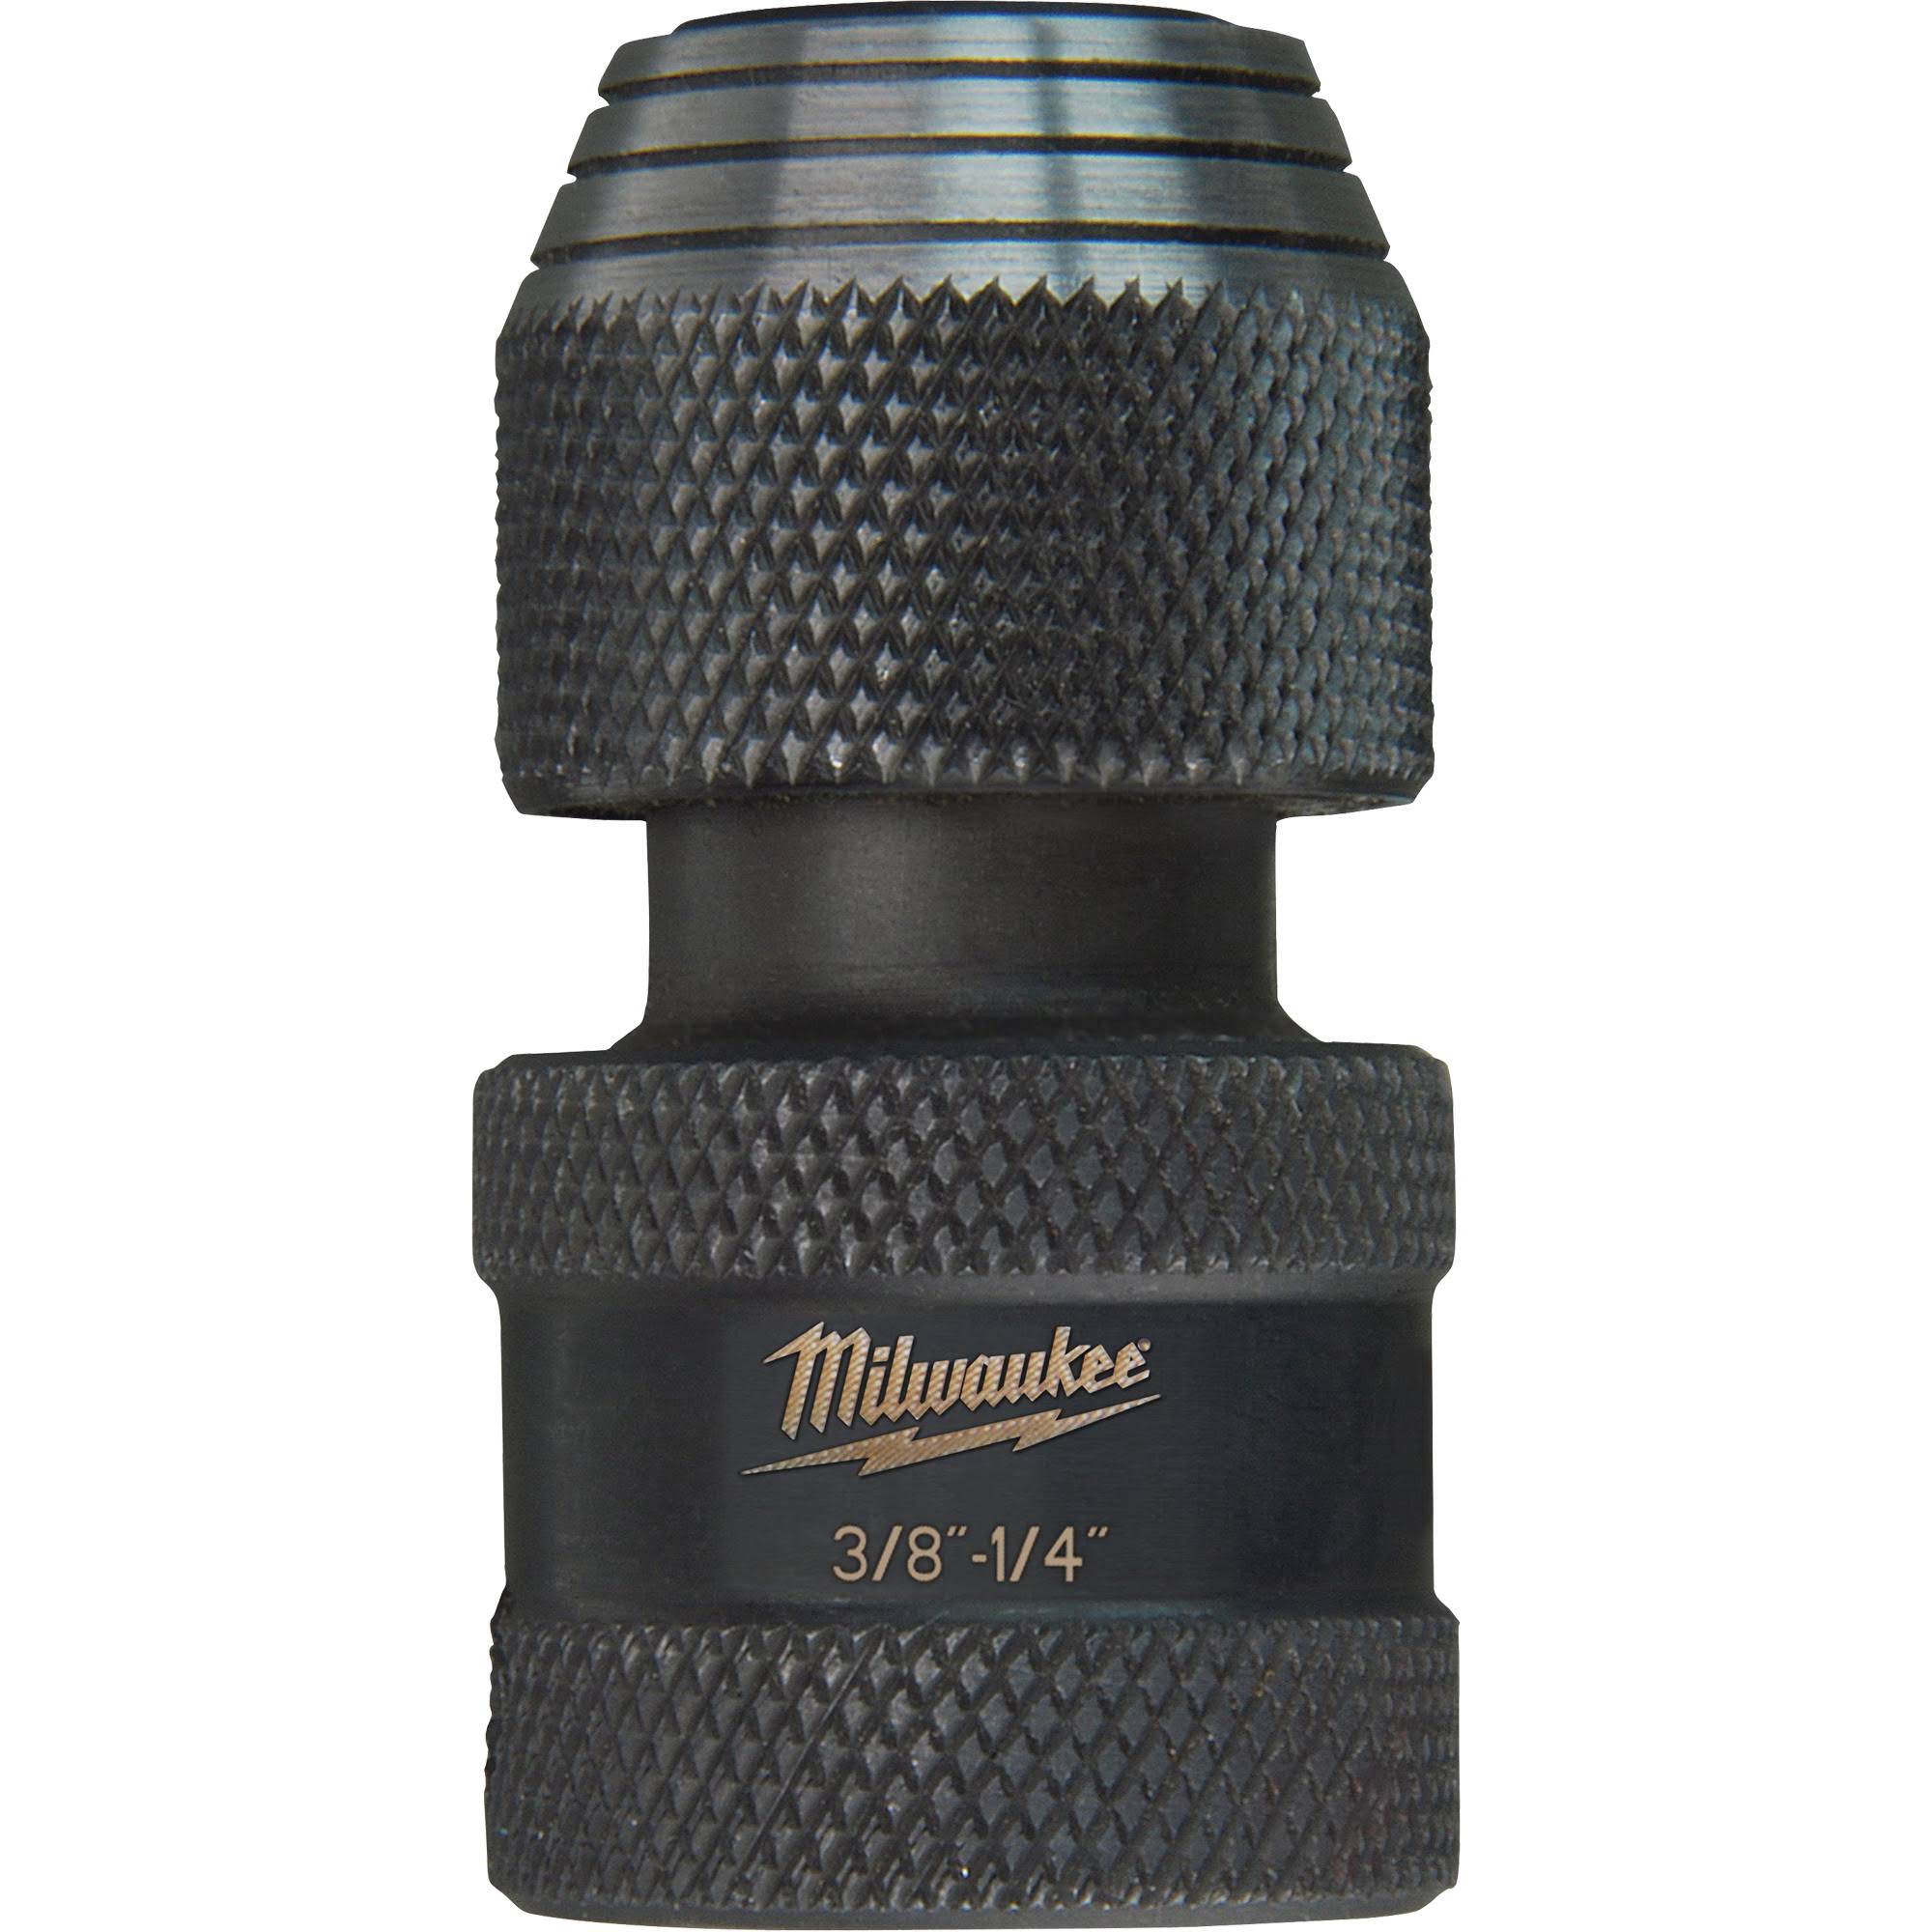 Milwaukee Shockwave Impact Adapter - 3/8 in square x 1/4 in hex